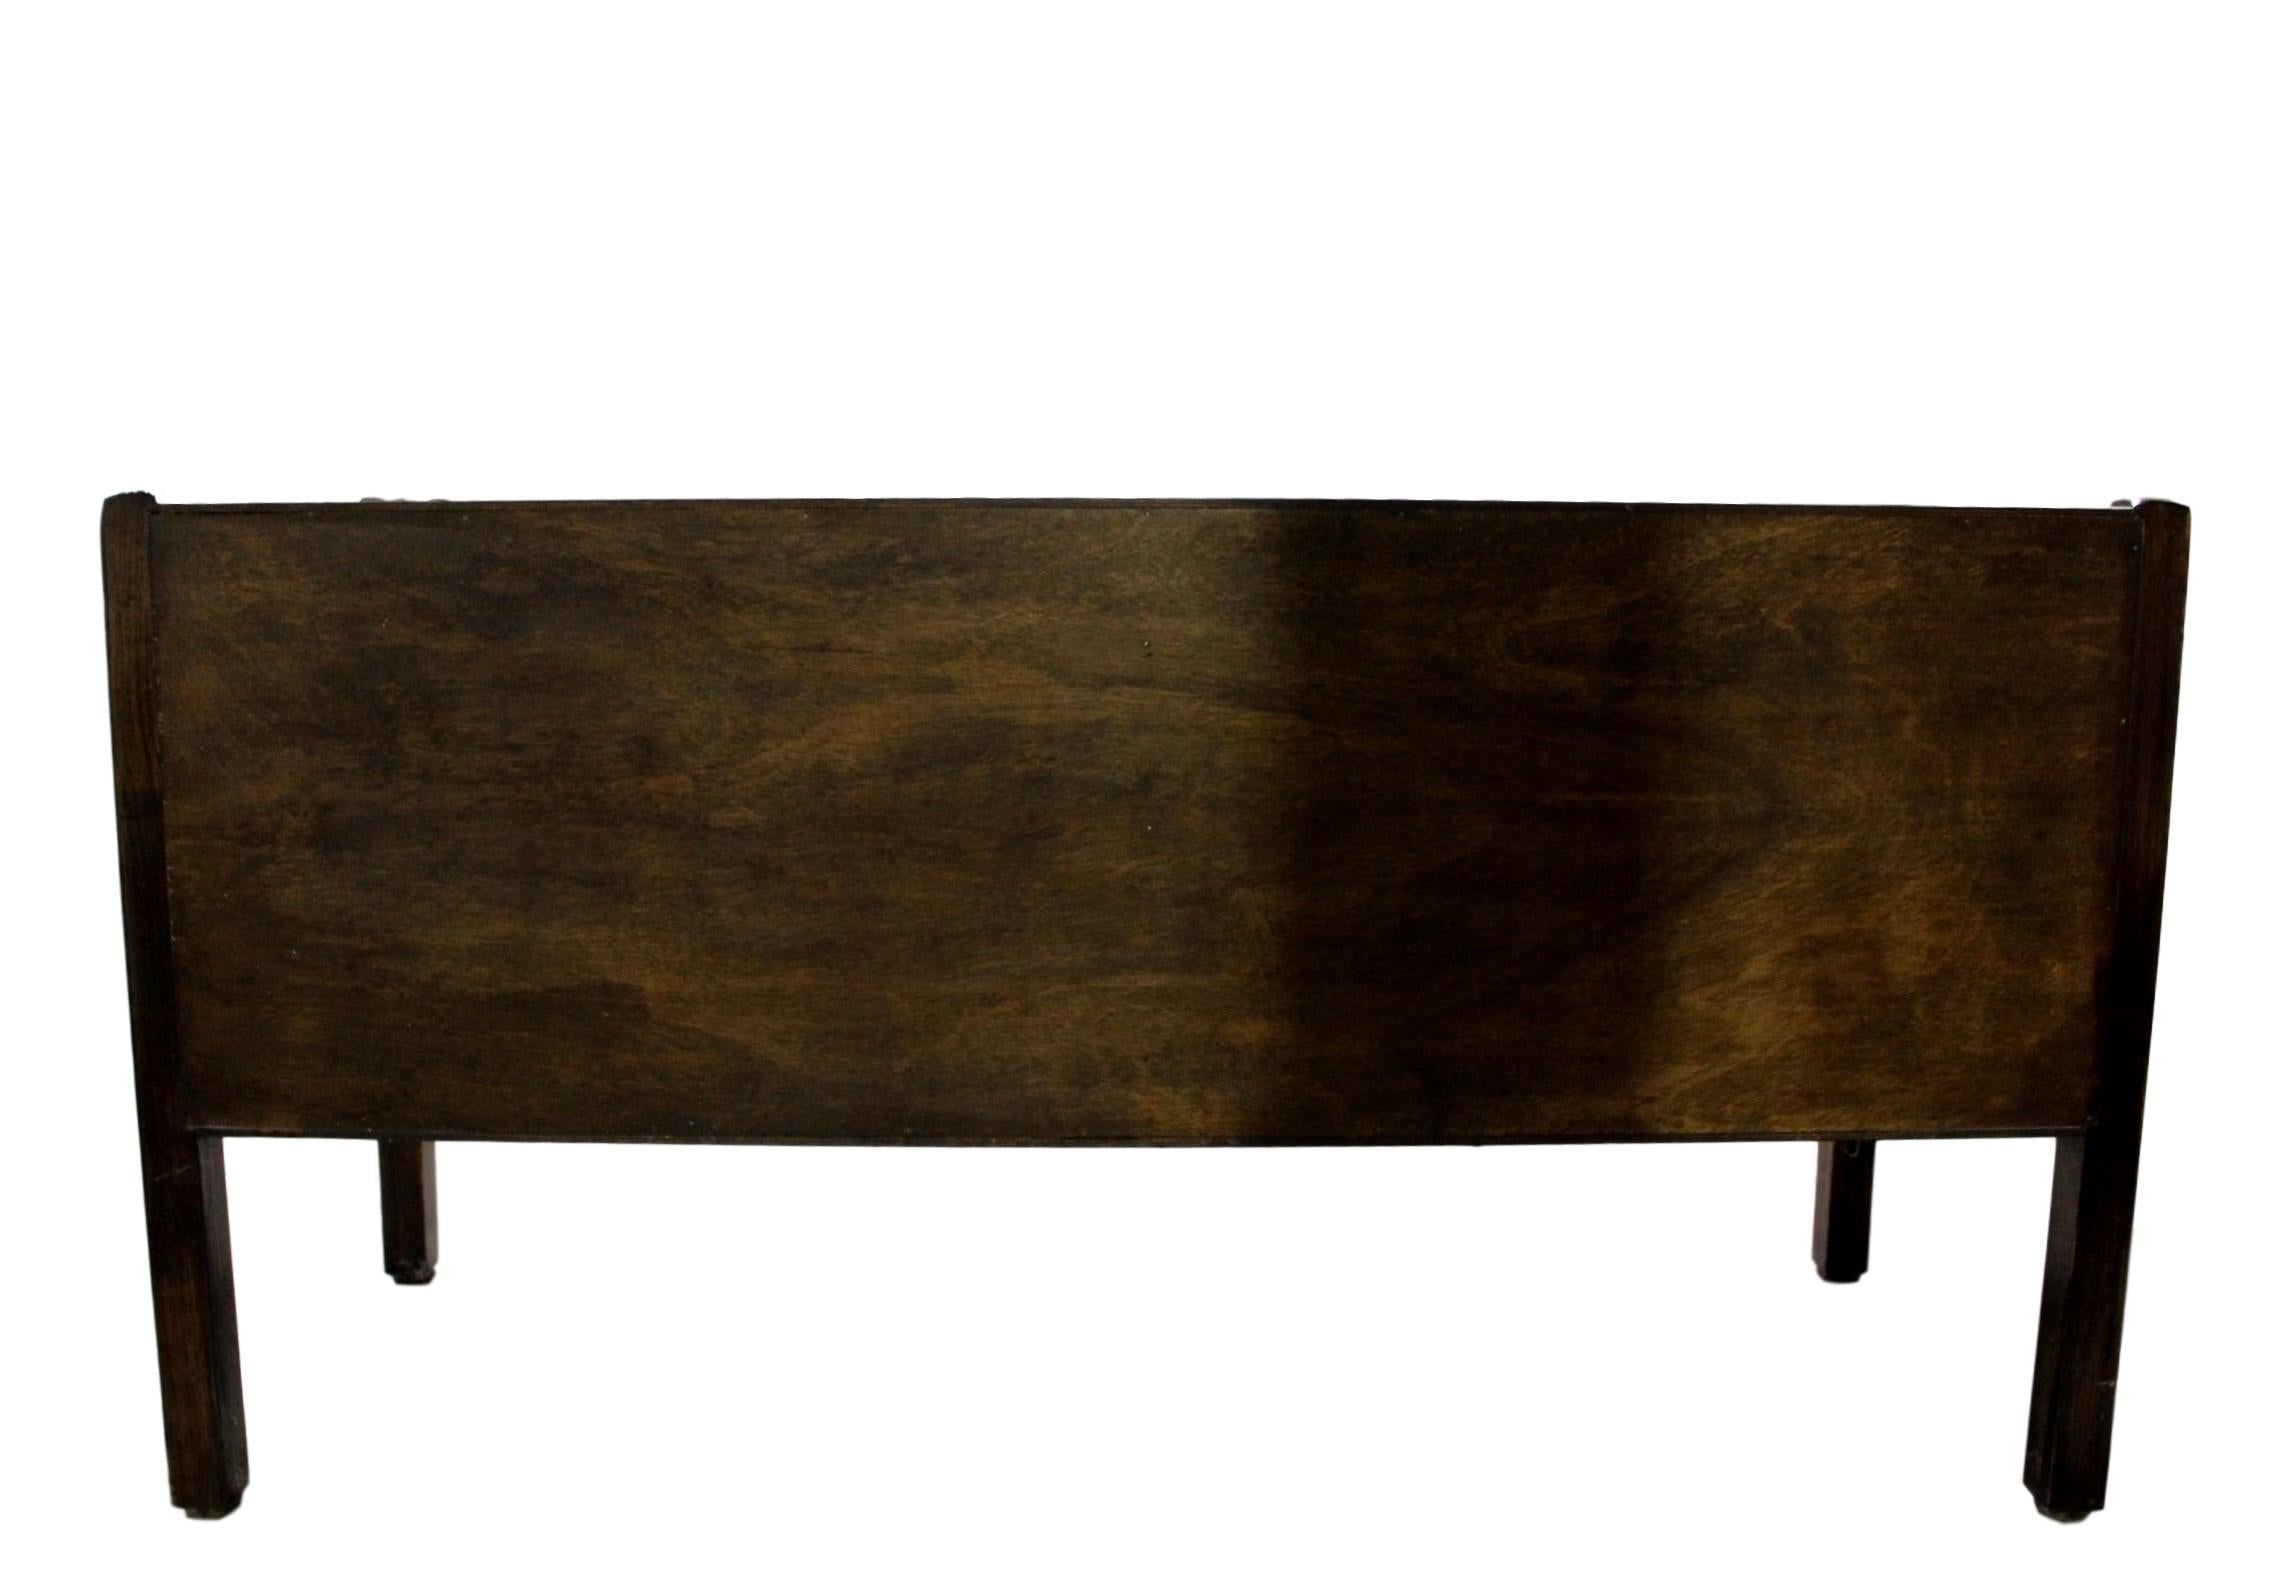 Wood Sergio Rodrigues, Credenza Luciana, Sideboard Luciana, 1960s For Sale